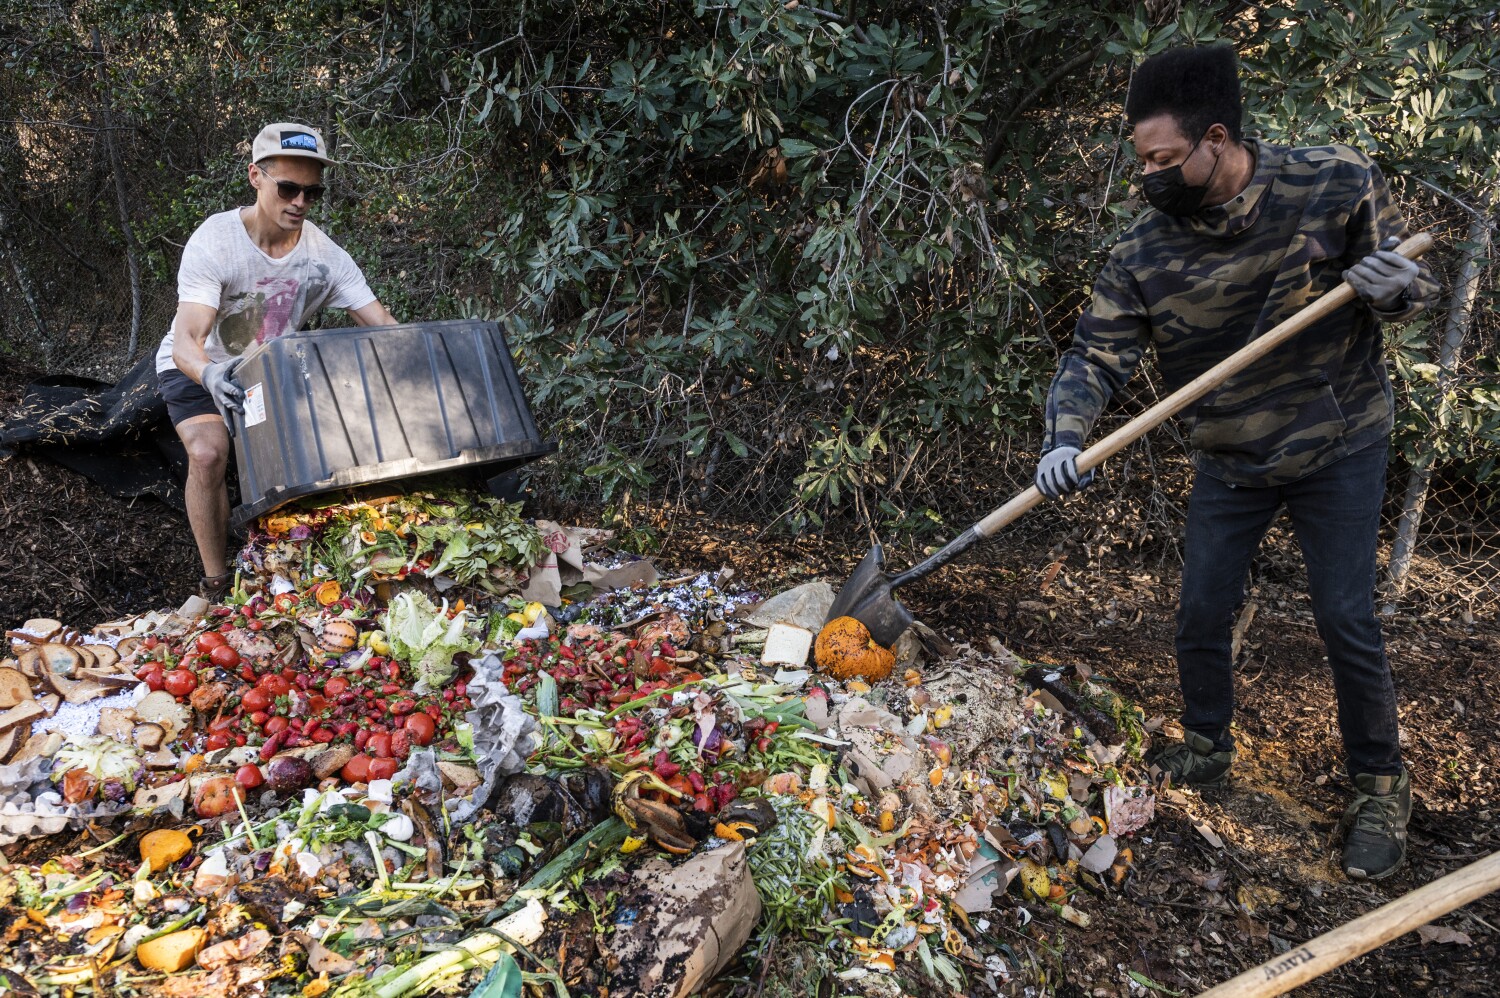 Composting is life-altering for Californians who want a role fighting climate change